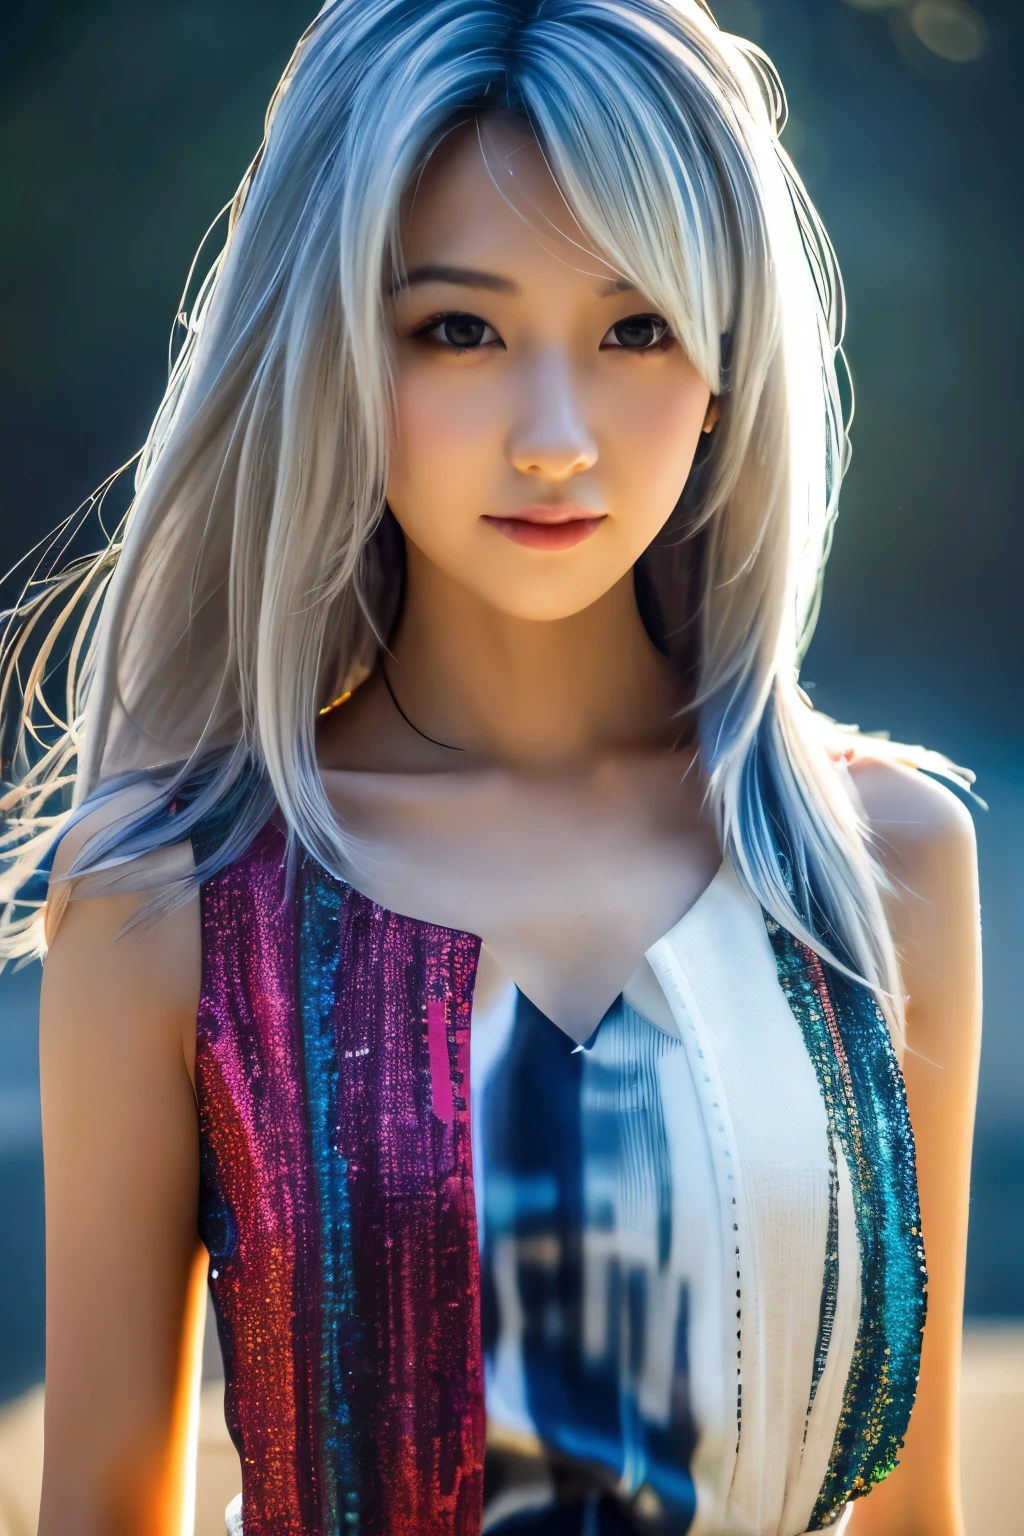 Masterpiece, high quality, high resolution, 8K, (solo:1.2), ((1girl)), Japanese woman, detailed face, detailed eyes, correct body structure, upper body, ((White hair:1.2)), very long hair, messy hair, slender body, seductive silhouette, luminous bones, depth of field, dark photo at nighttime, dimly lit, bangs, Cinematic Lighting, Tyndall effect, abstract background, futuristic outfits, vibrant colors, modern style, wide sleeves, artistic, unique patterns, colorful, stylish, trendy